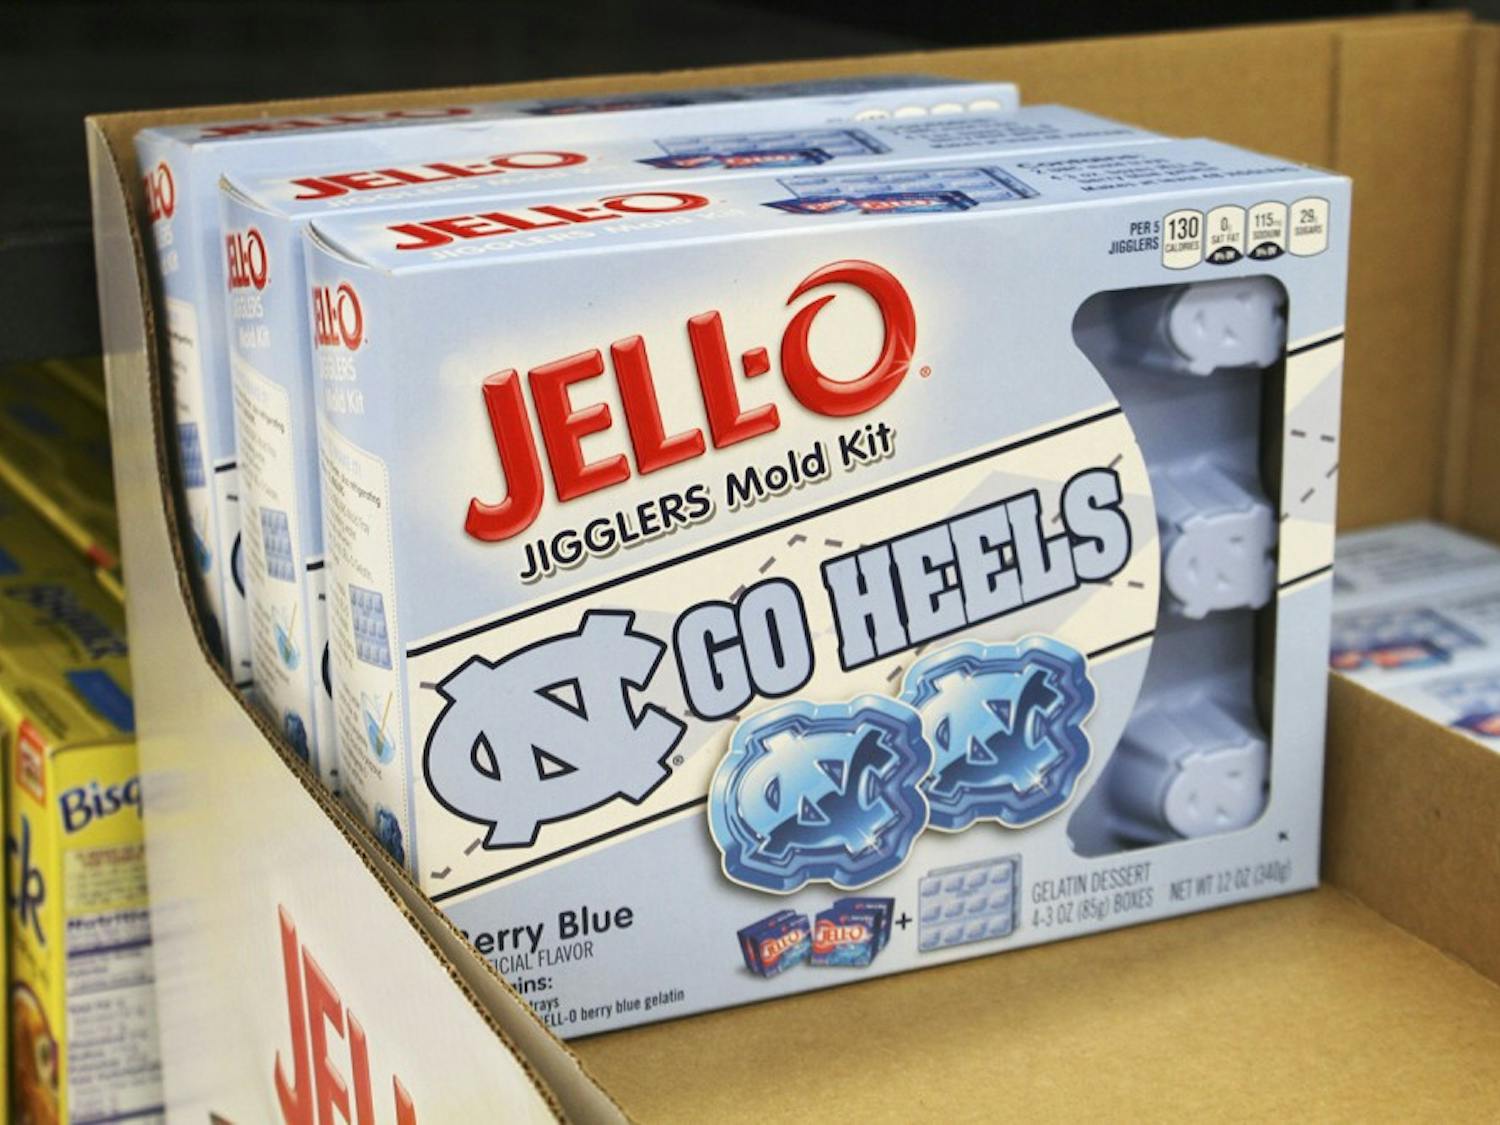 Walmart is a carrier for the UNC Jello Mold.